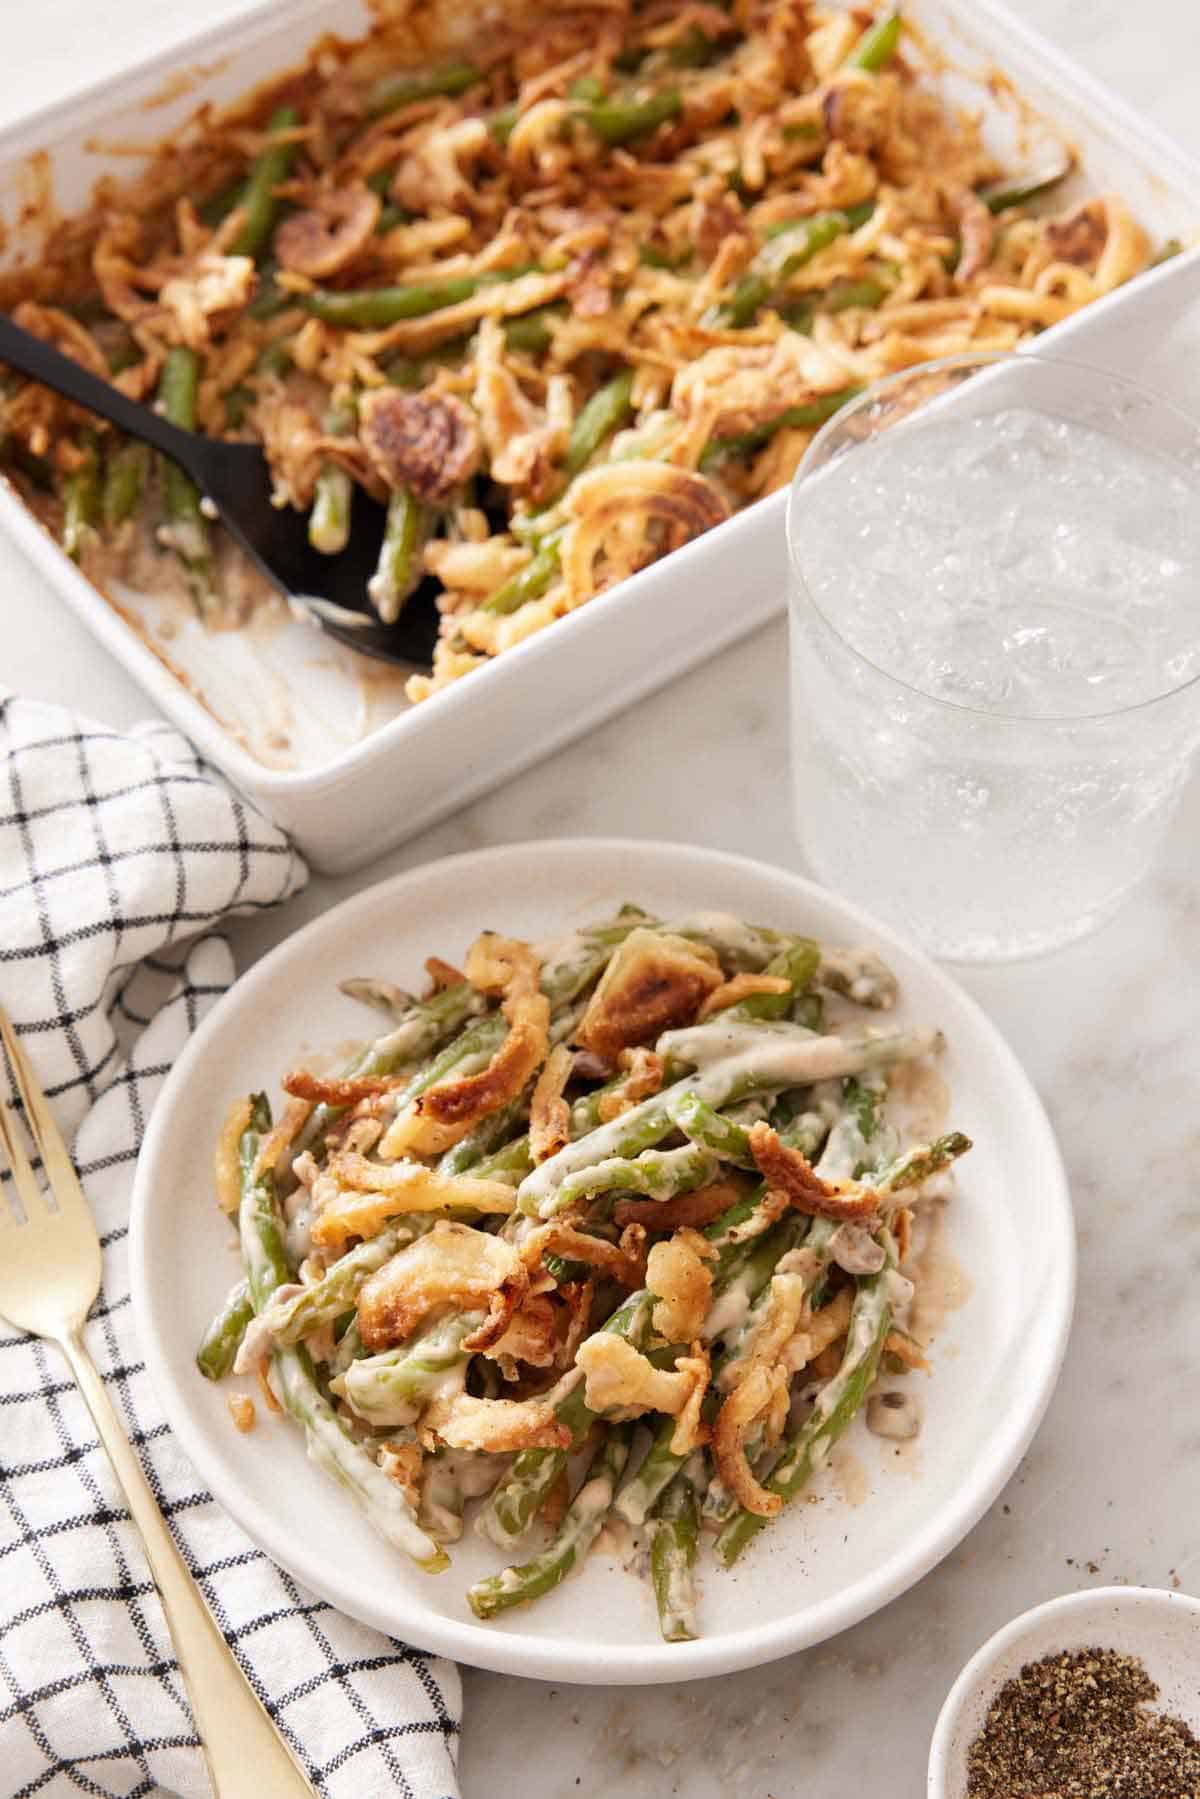 A plate with a serving of green bean casserole with a glass of water and baking dish in the background.